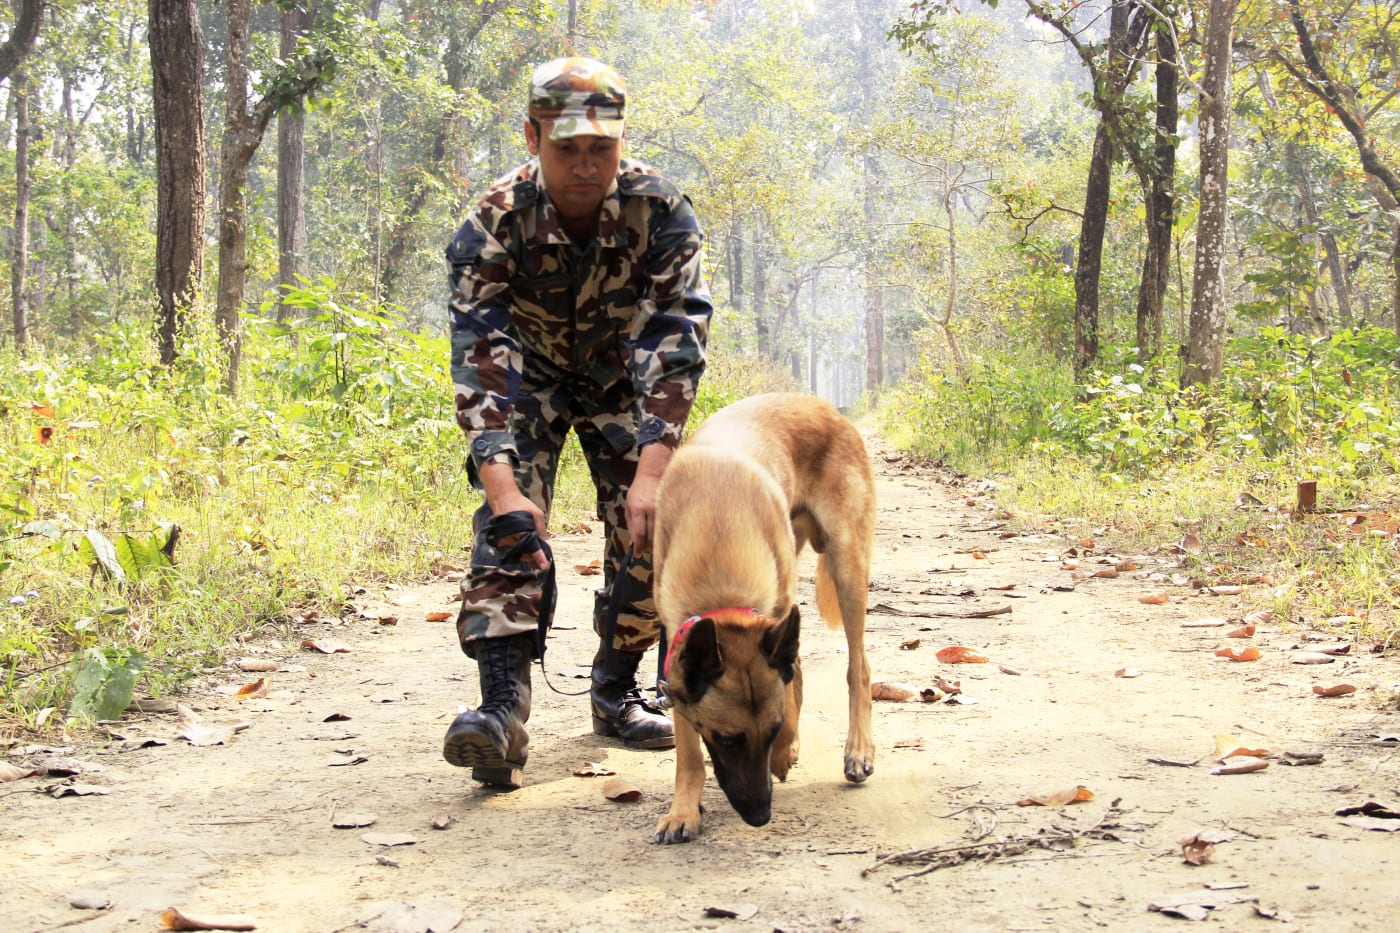 Murray being trained on tracking skills by his handler at Chitwan National Park, Nepal. With support from WWF, two sniffer dogs, Murray and Sears join the patrol team in Chitwan National Park, to help tackle poaching.